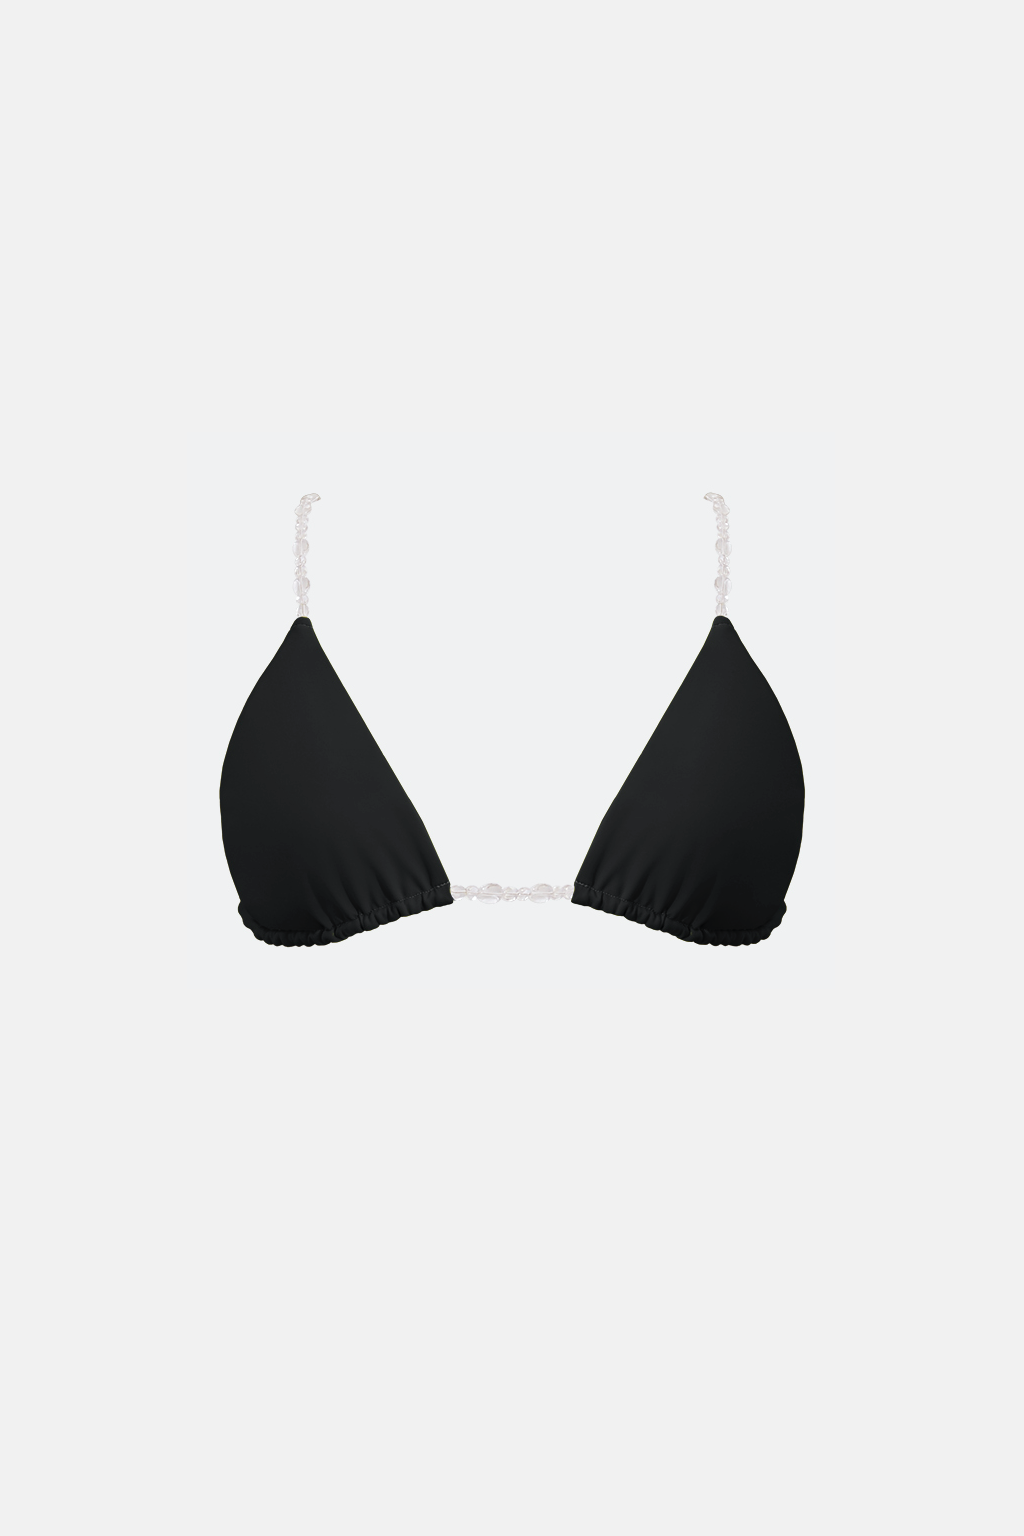 THE ILLUSION BLACK BIKINI TOP WITH CLEAR GLASS BEADS SUSTAINABLE SWIMWEAR LUXURY BATHING SUIT TOP